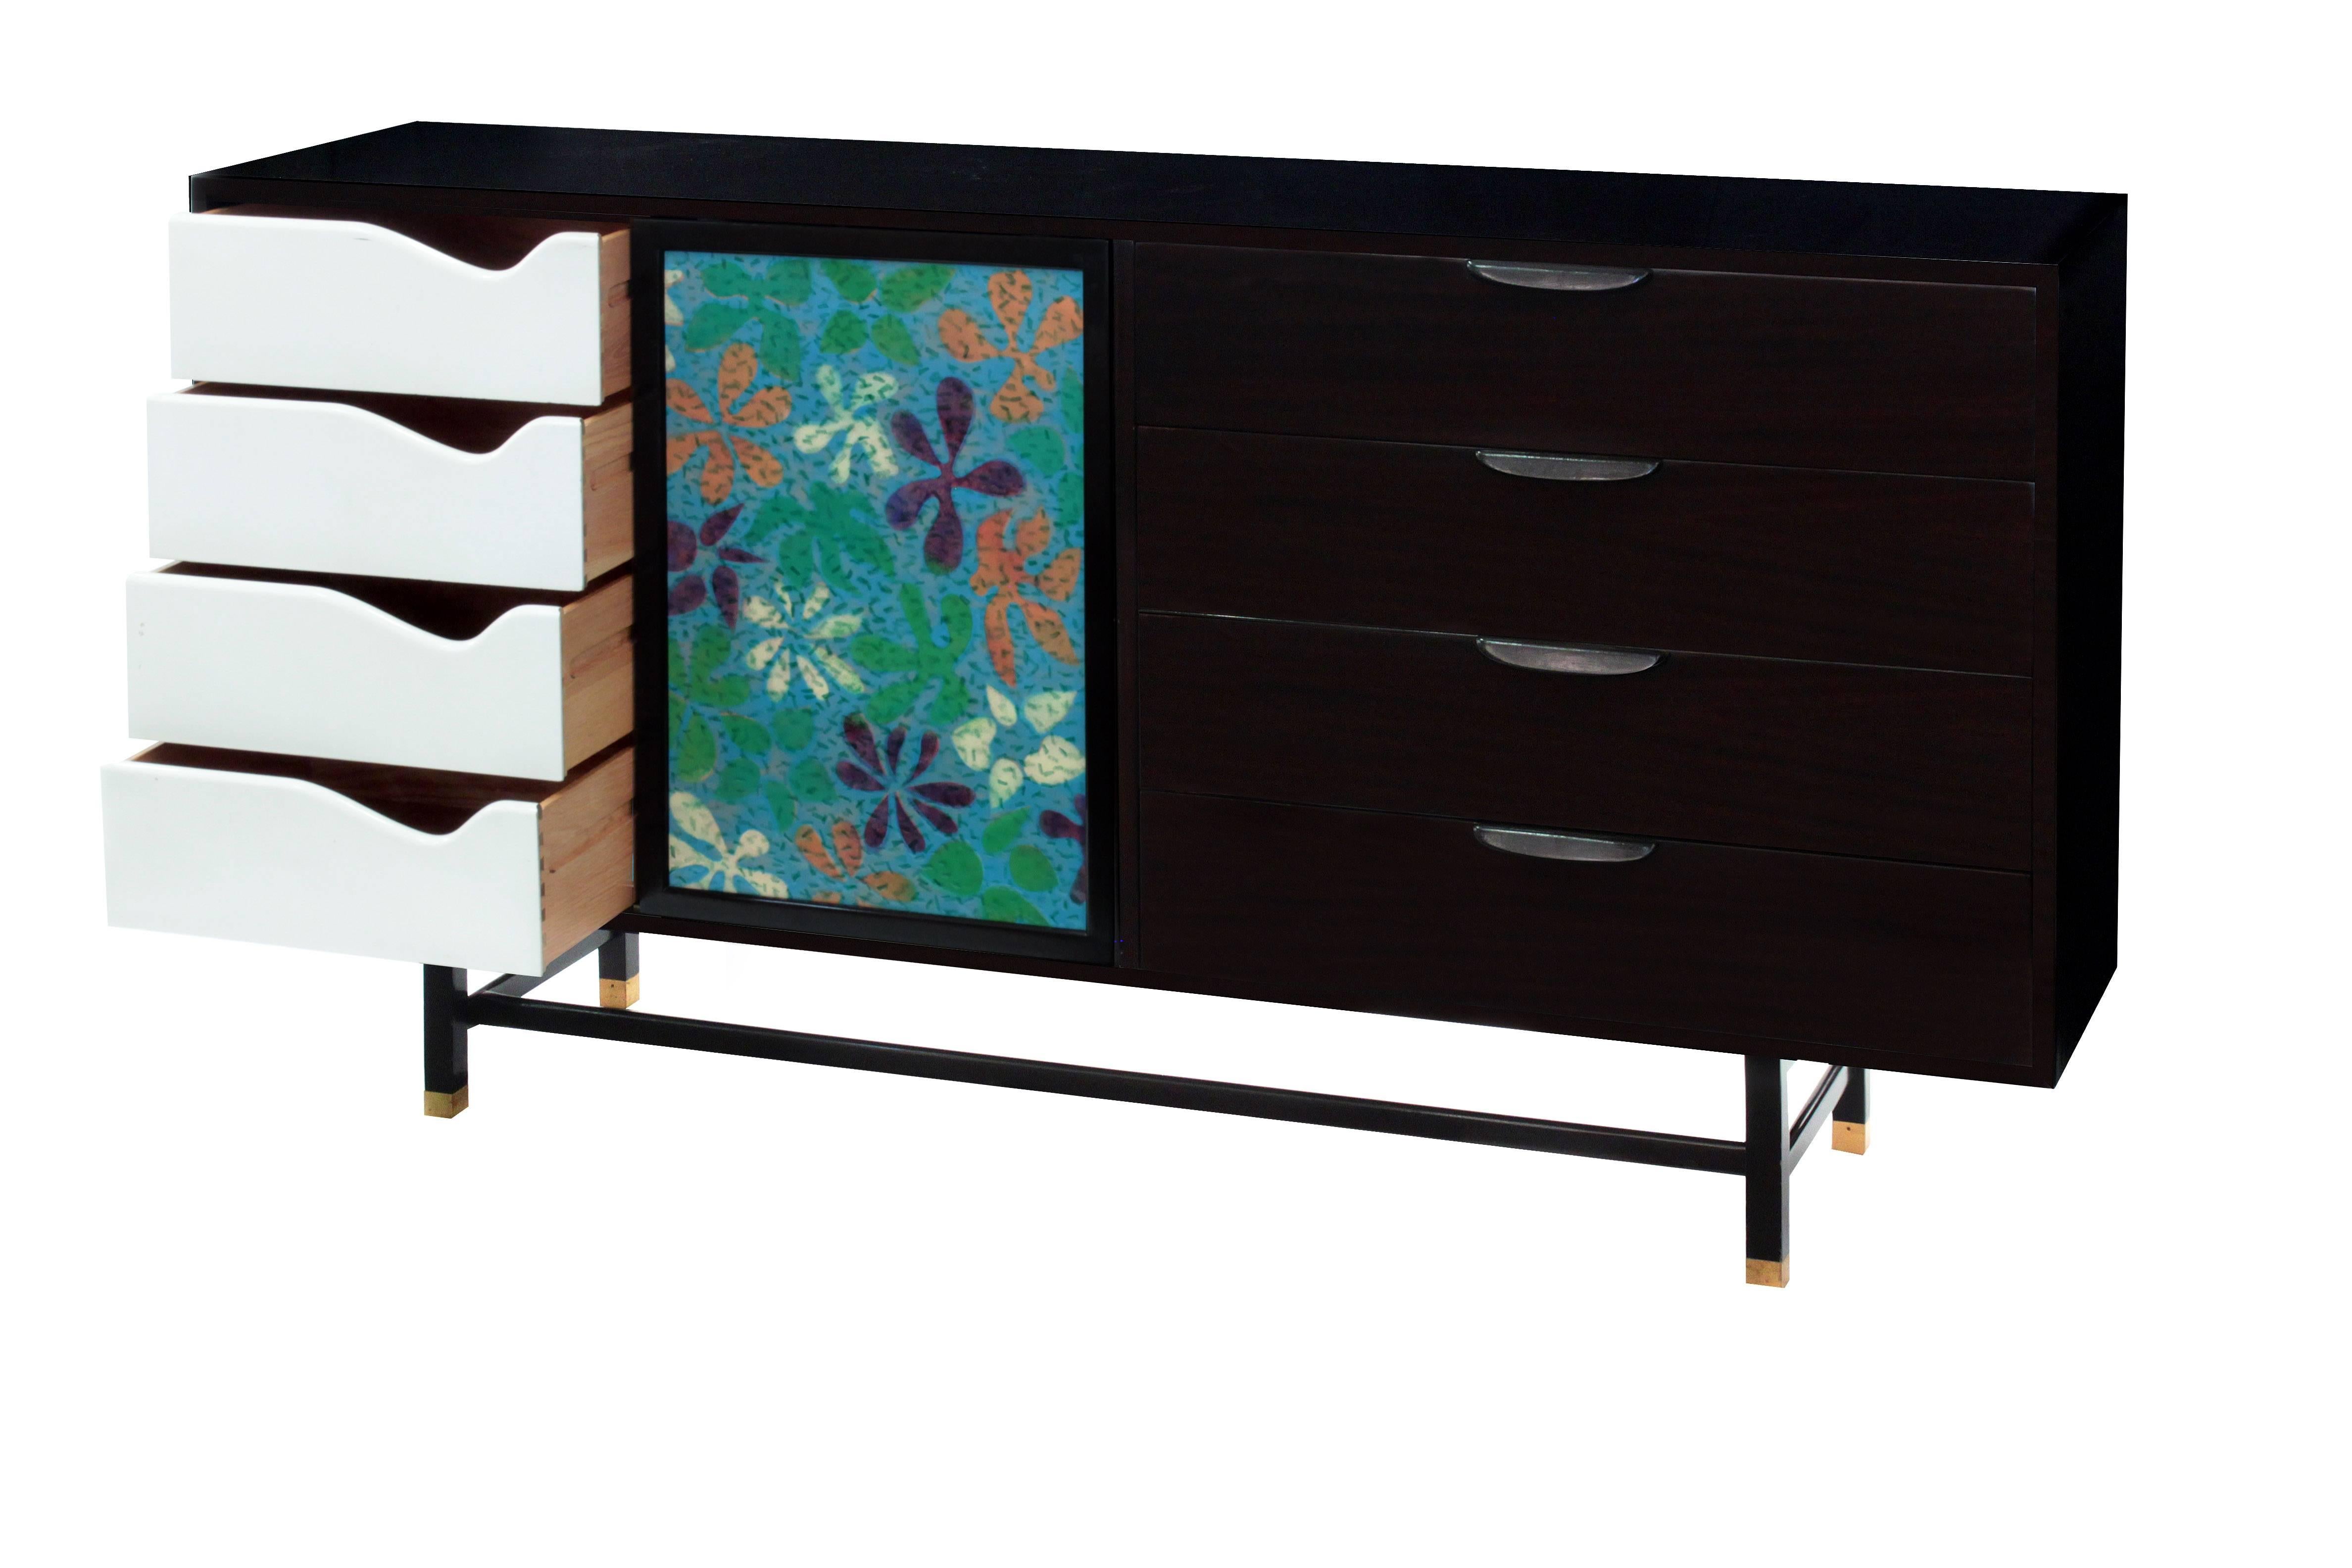 Cabinet No.1079 in mahogany with two doors inset with jewelry enamel on copper graphic flower design and rosewood pulls by Harvey Probber, American, 1950s (signed). Harvey Probber's name is synonymous with exceptional craftsmanship. Probber looked